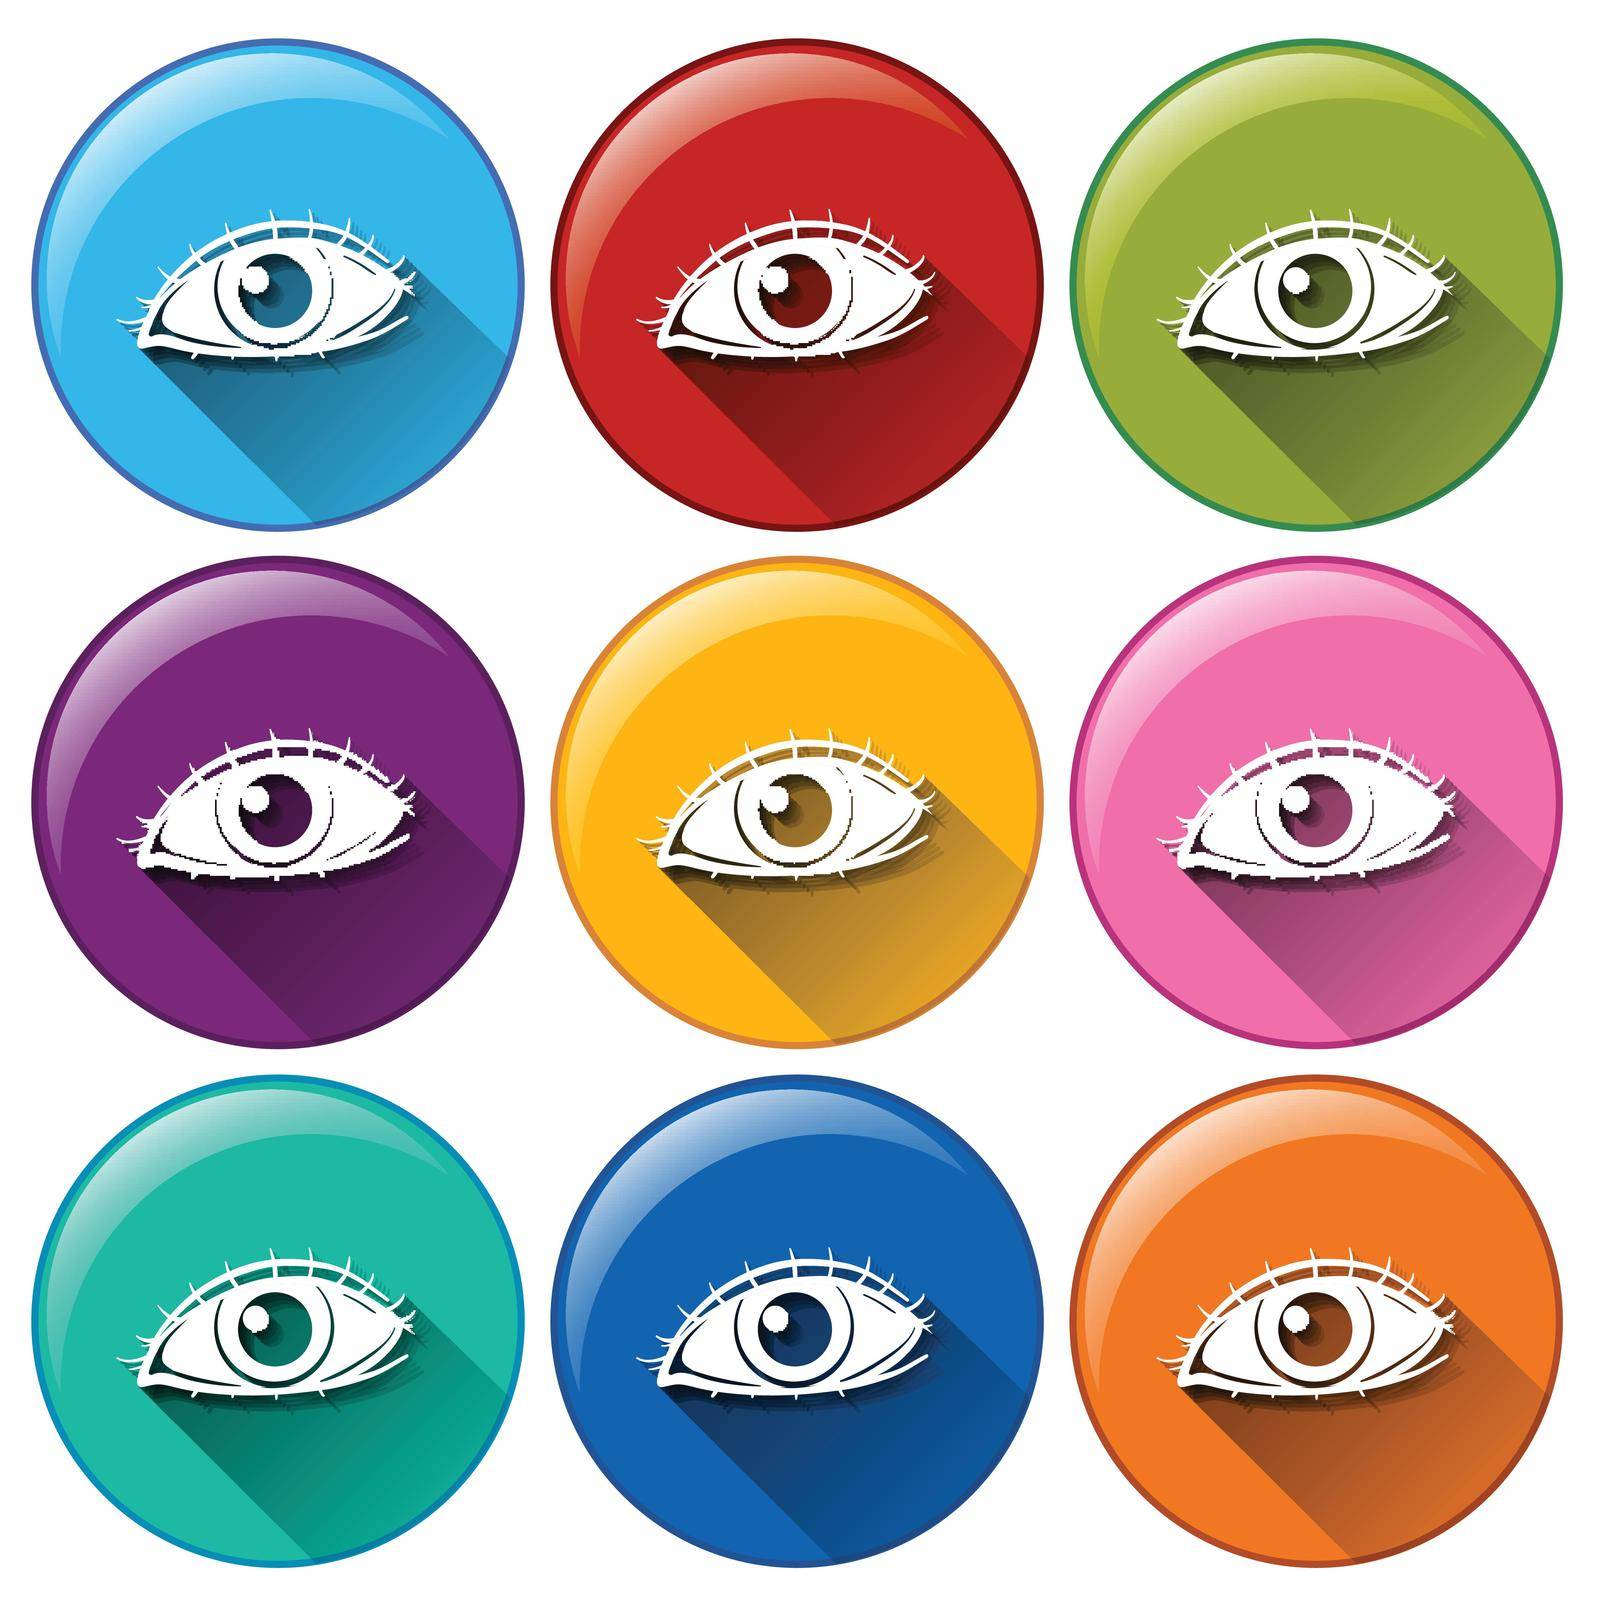 Illustration of the round icons with eyes on a white background